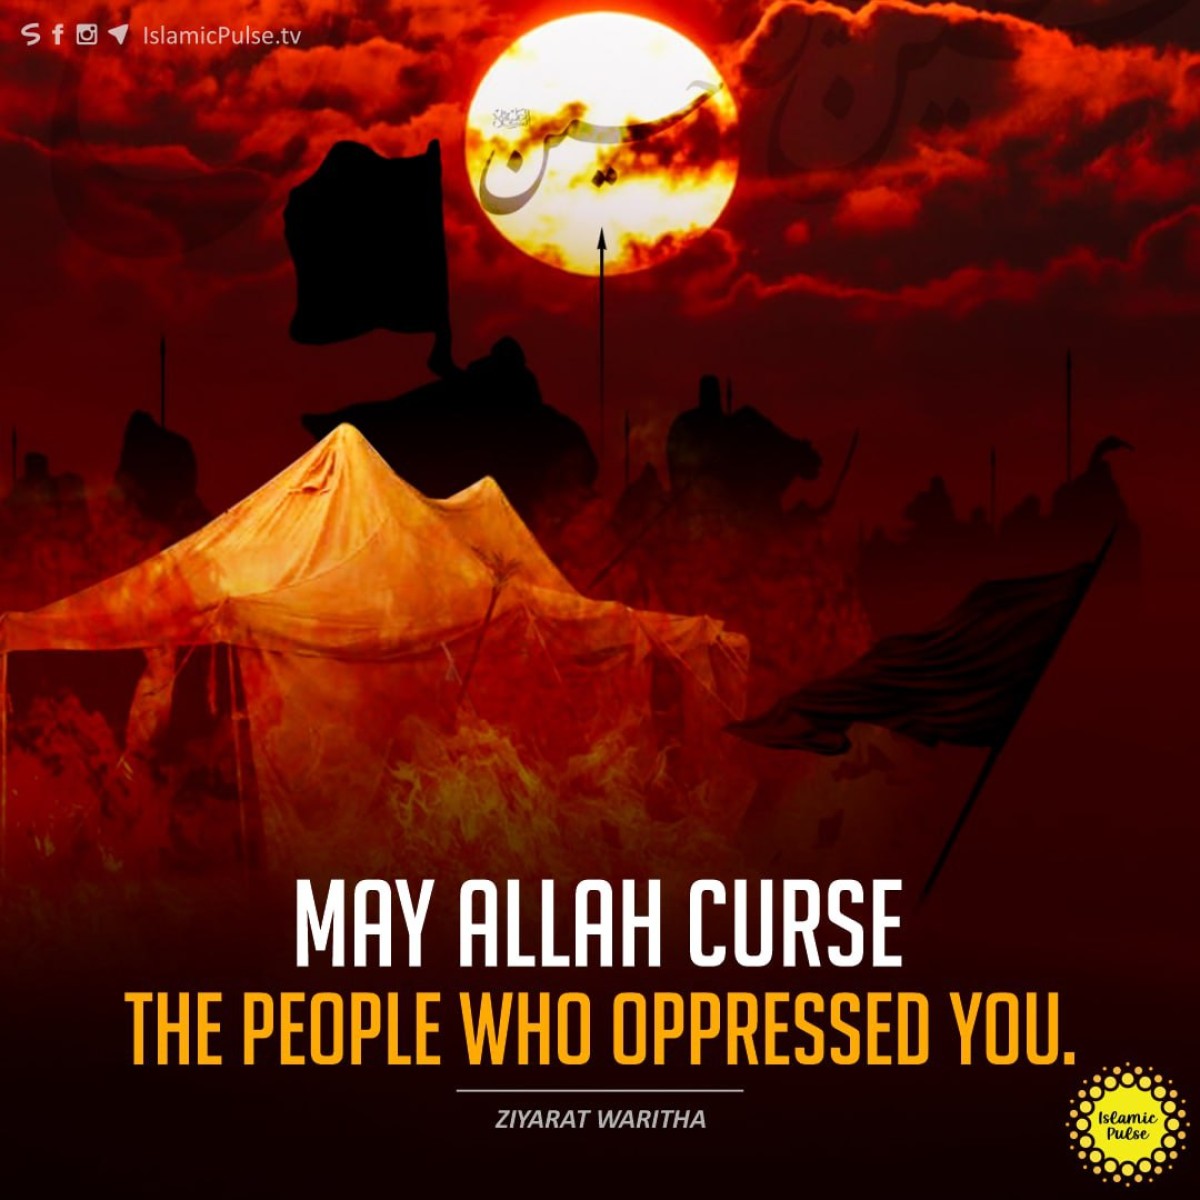 "May Allah curse the people who oppressed you."